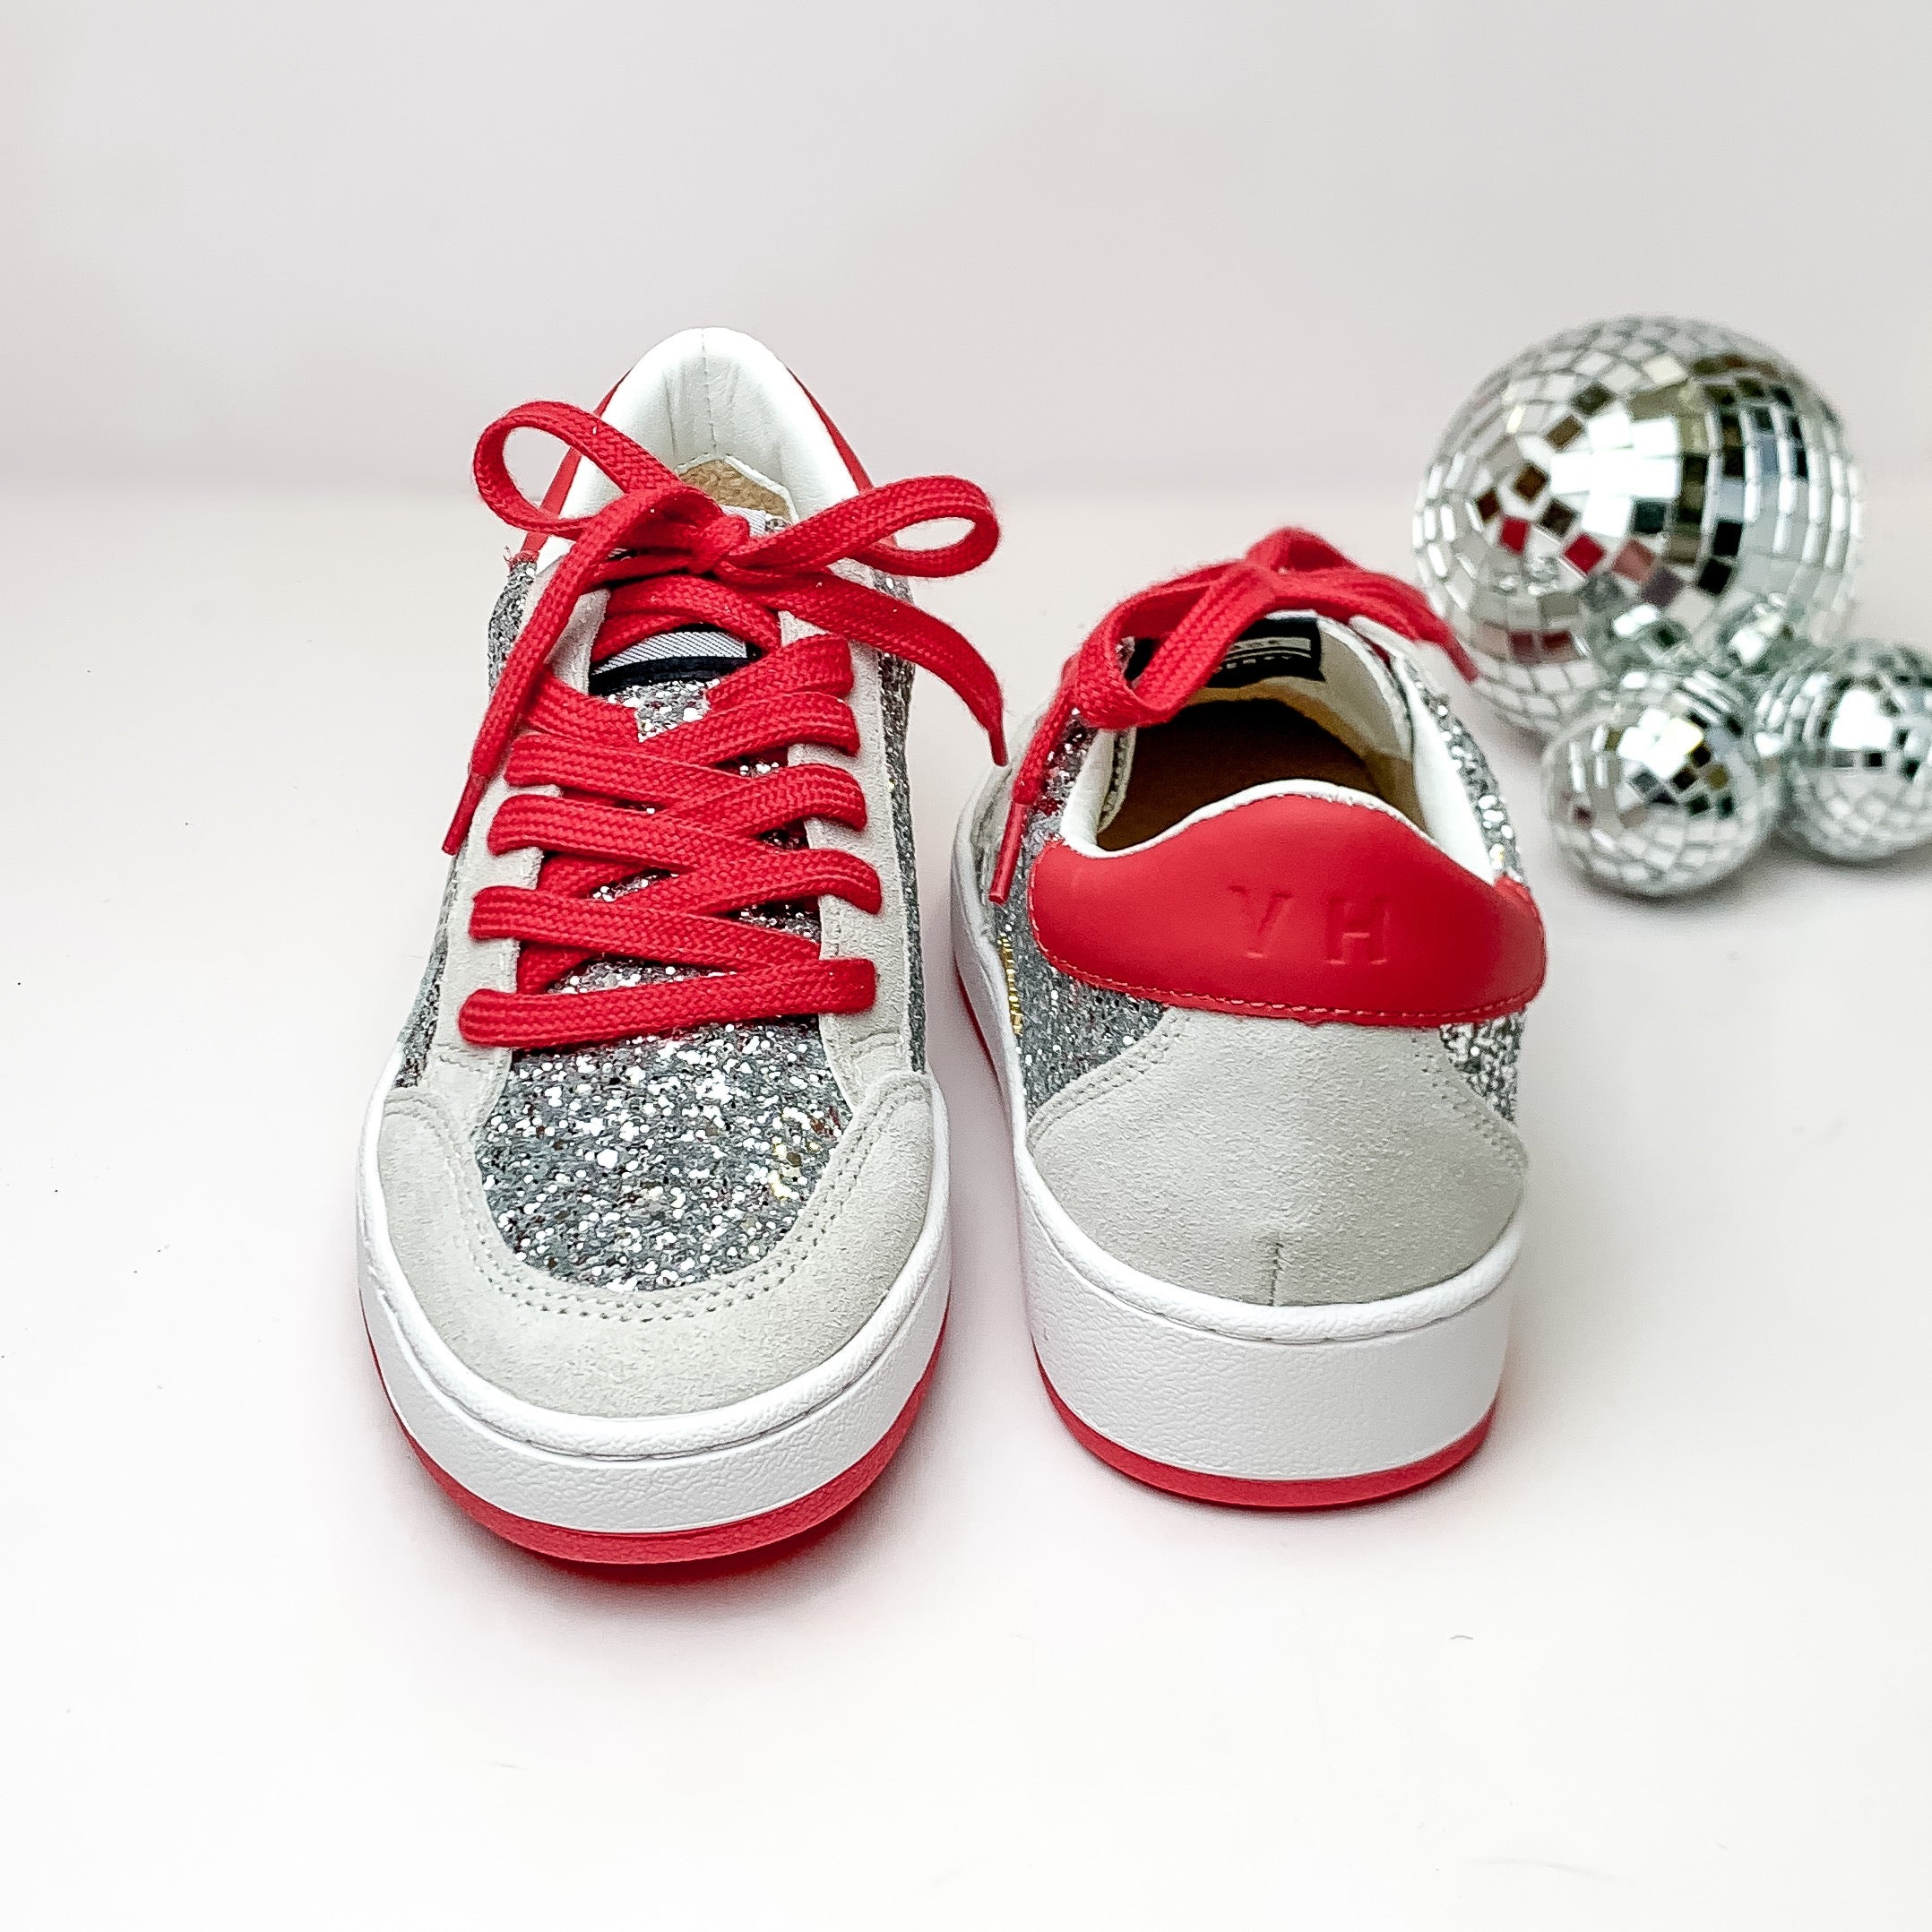 Vintage Havana | Denisse 18 Sneakers in Silver and Red Glitter Multi - Giddy Up Glamour Boutique